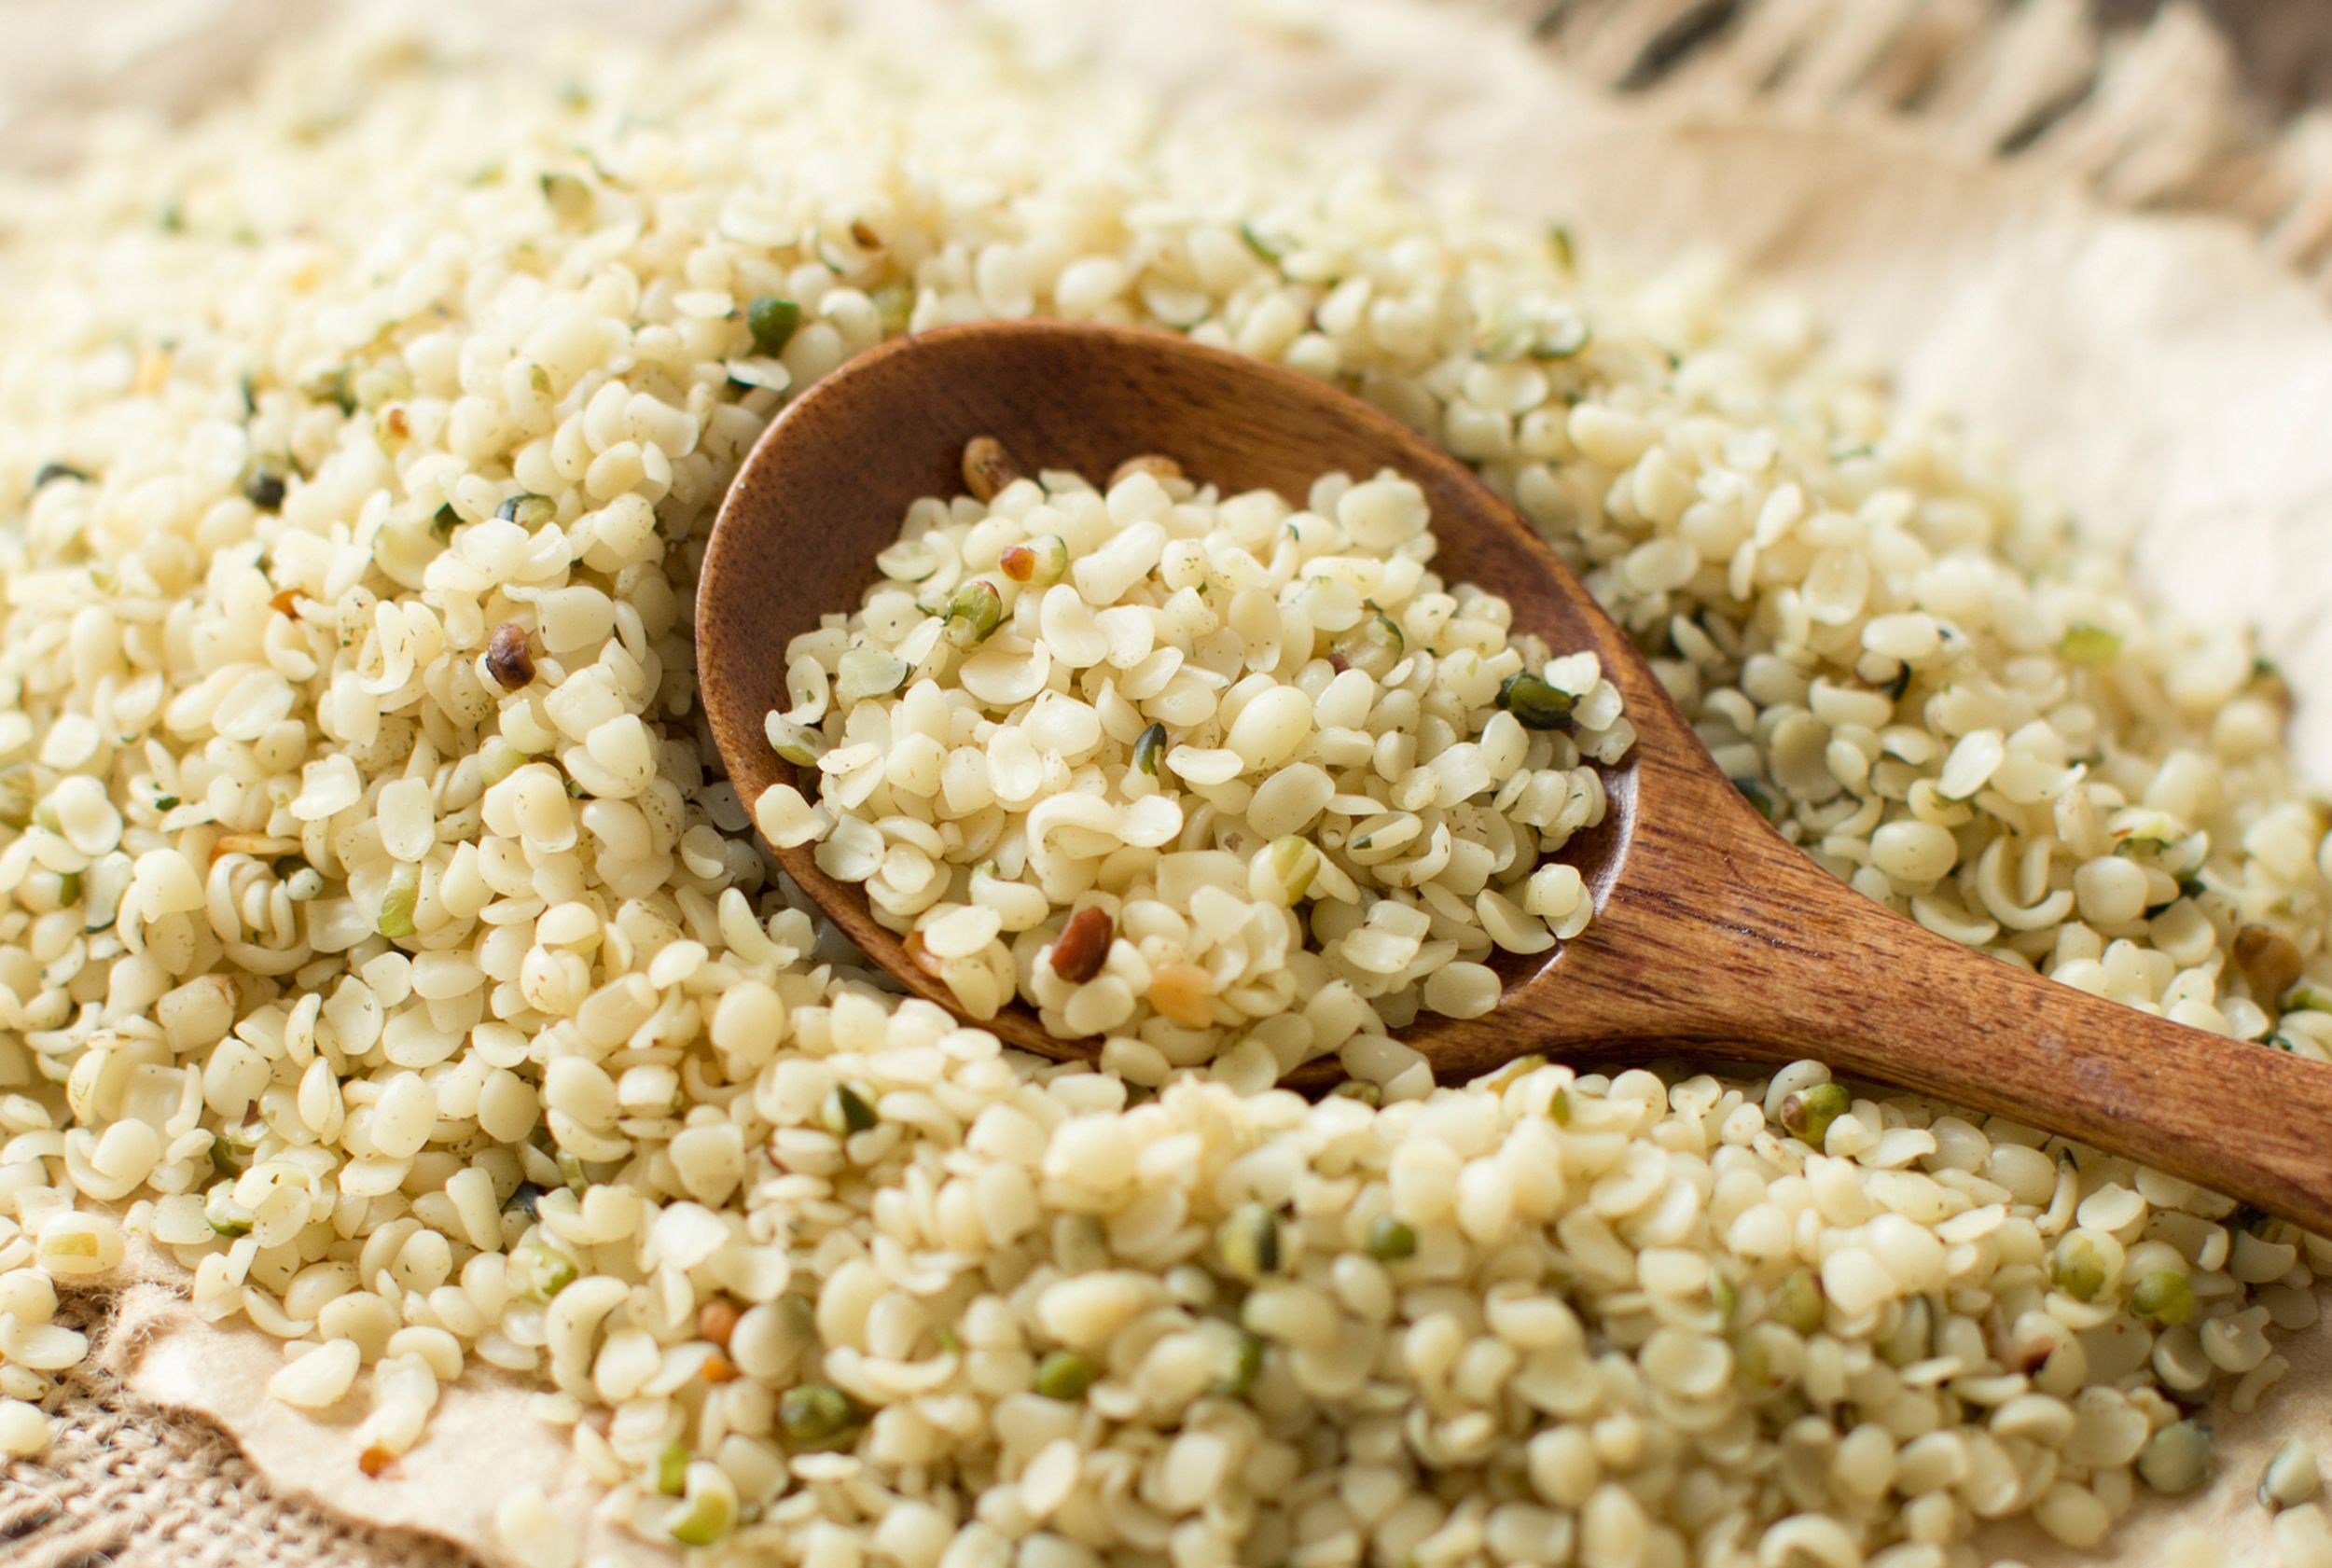 Do hemp seeds live up to the superfood hype? | The Spokesman-Review